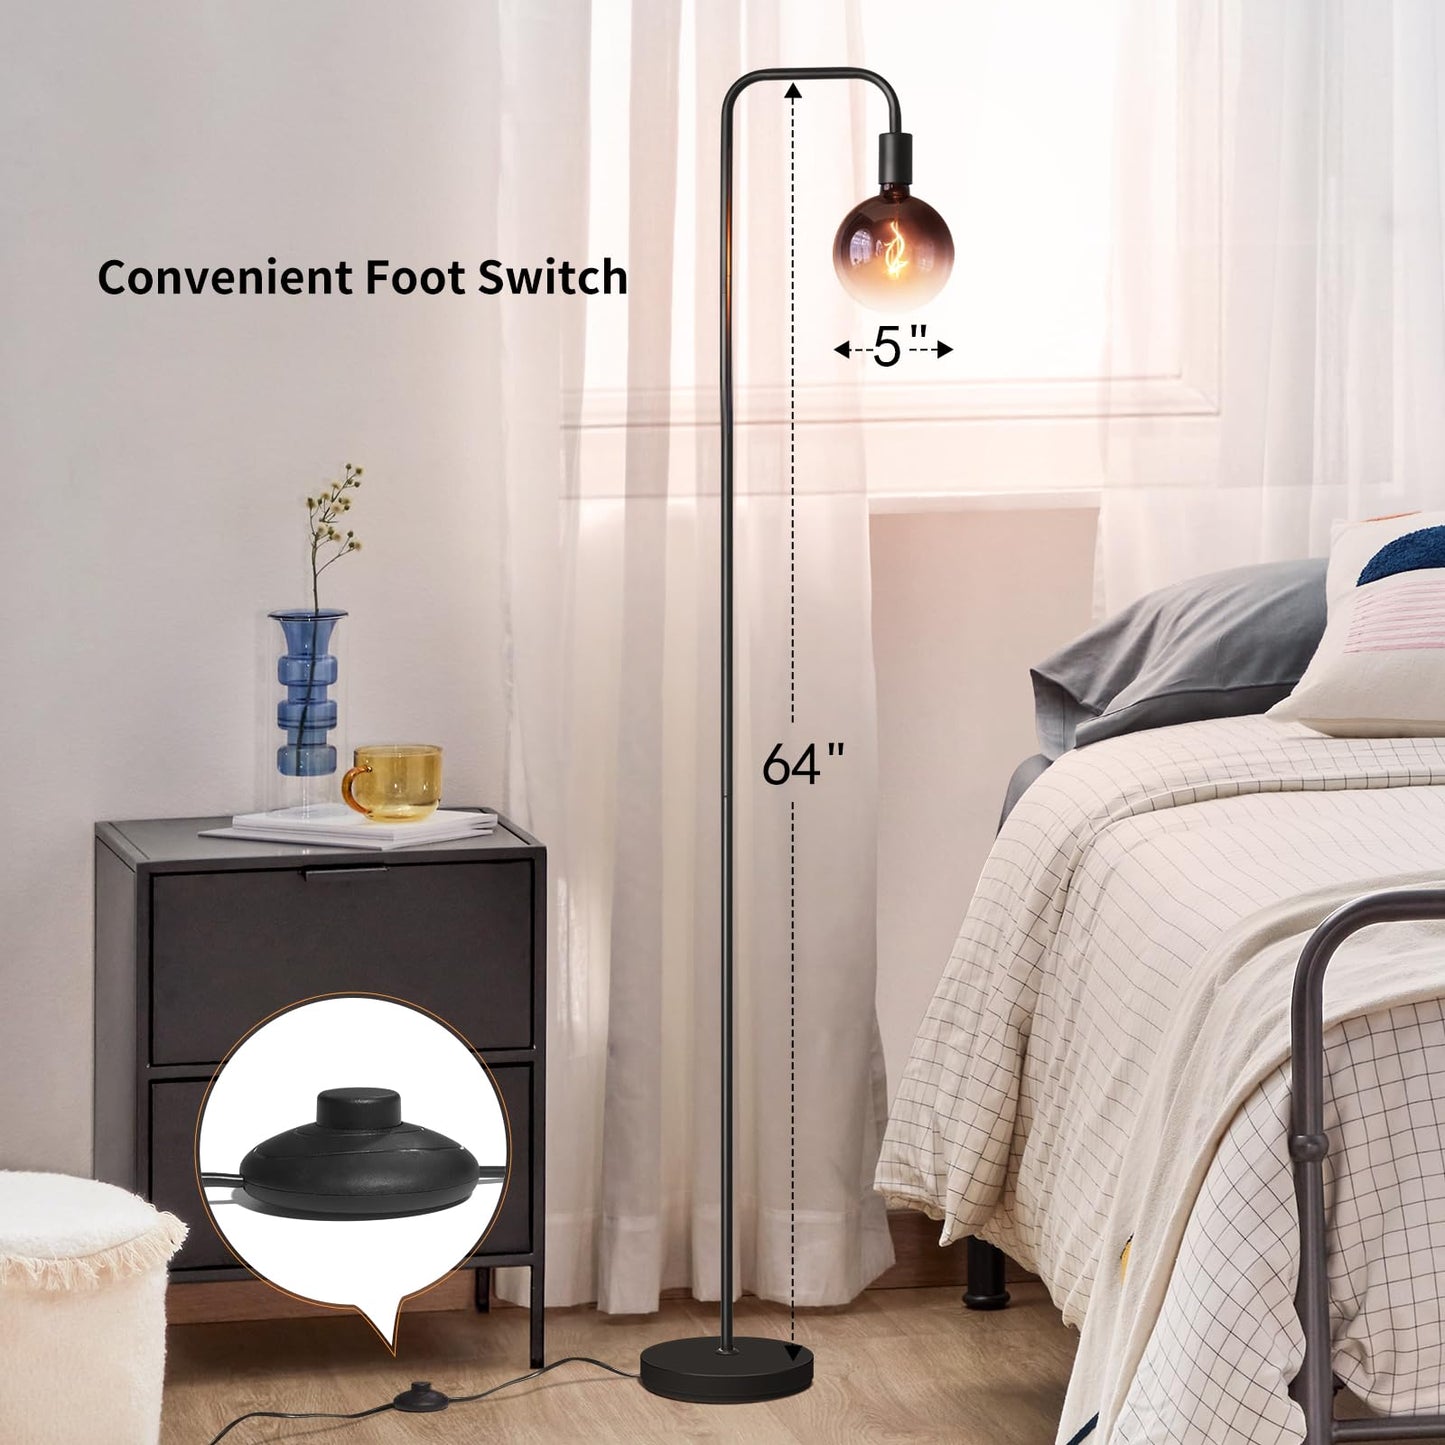 ONEWISH Floor Lamp For Living Room Convenient Foot Switch And Height